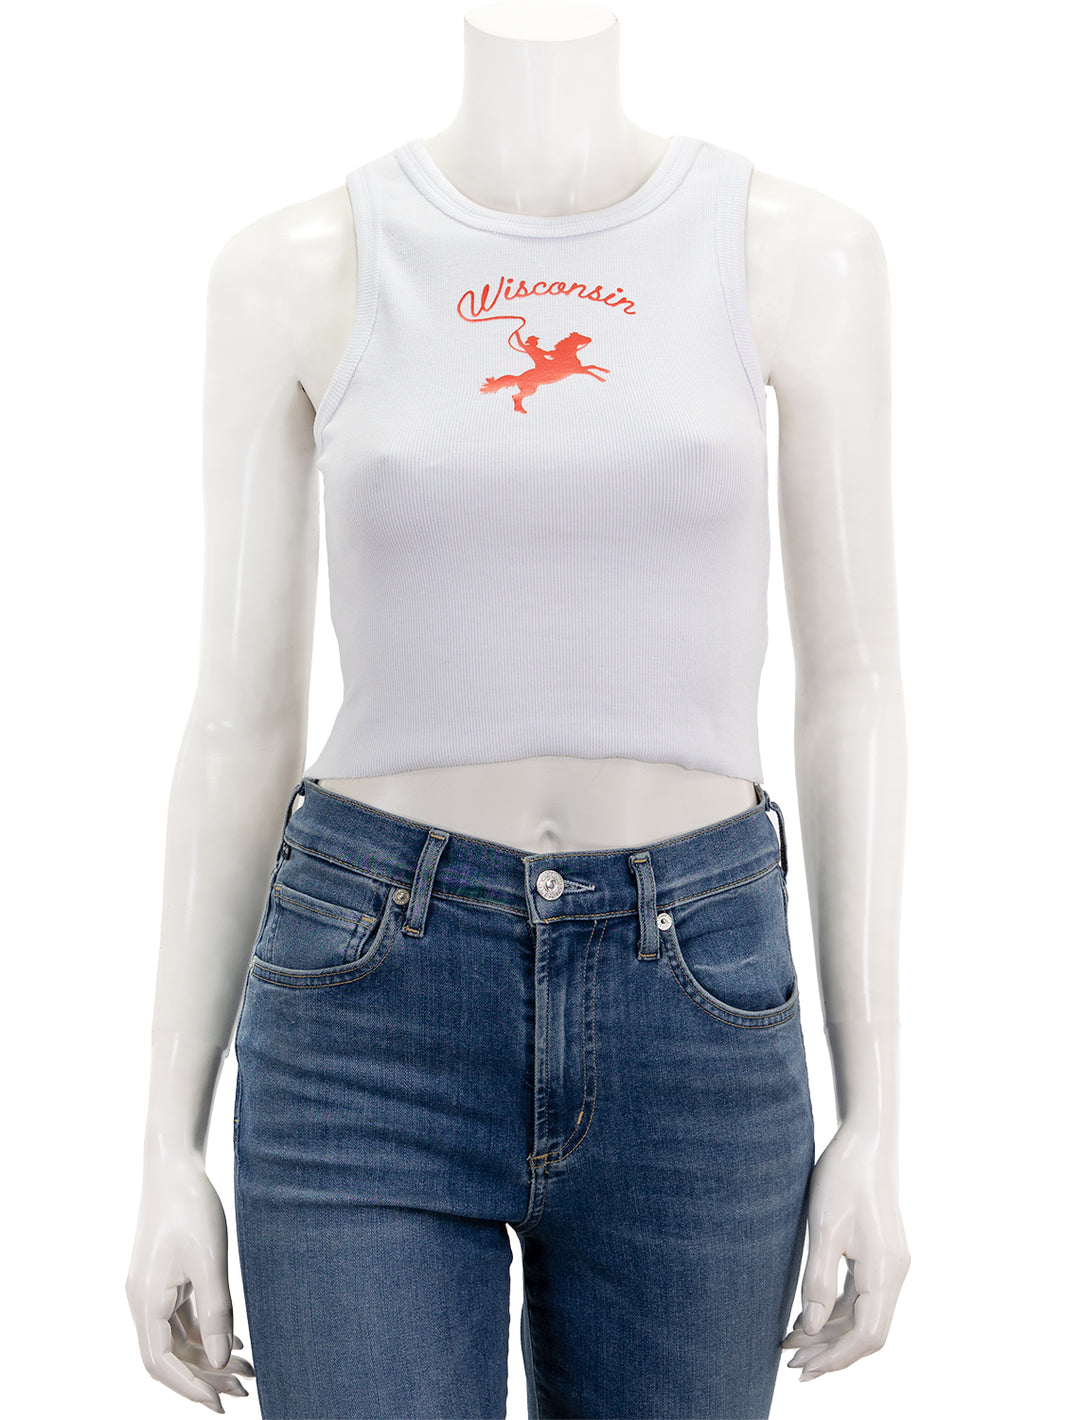 Front view of Recess Apparel's cropped wisco high neck tank in white.